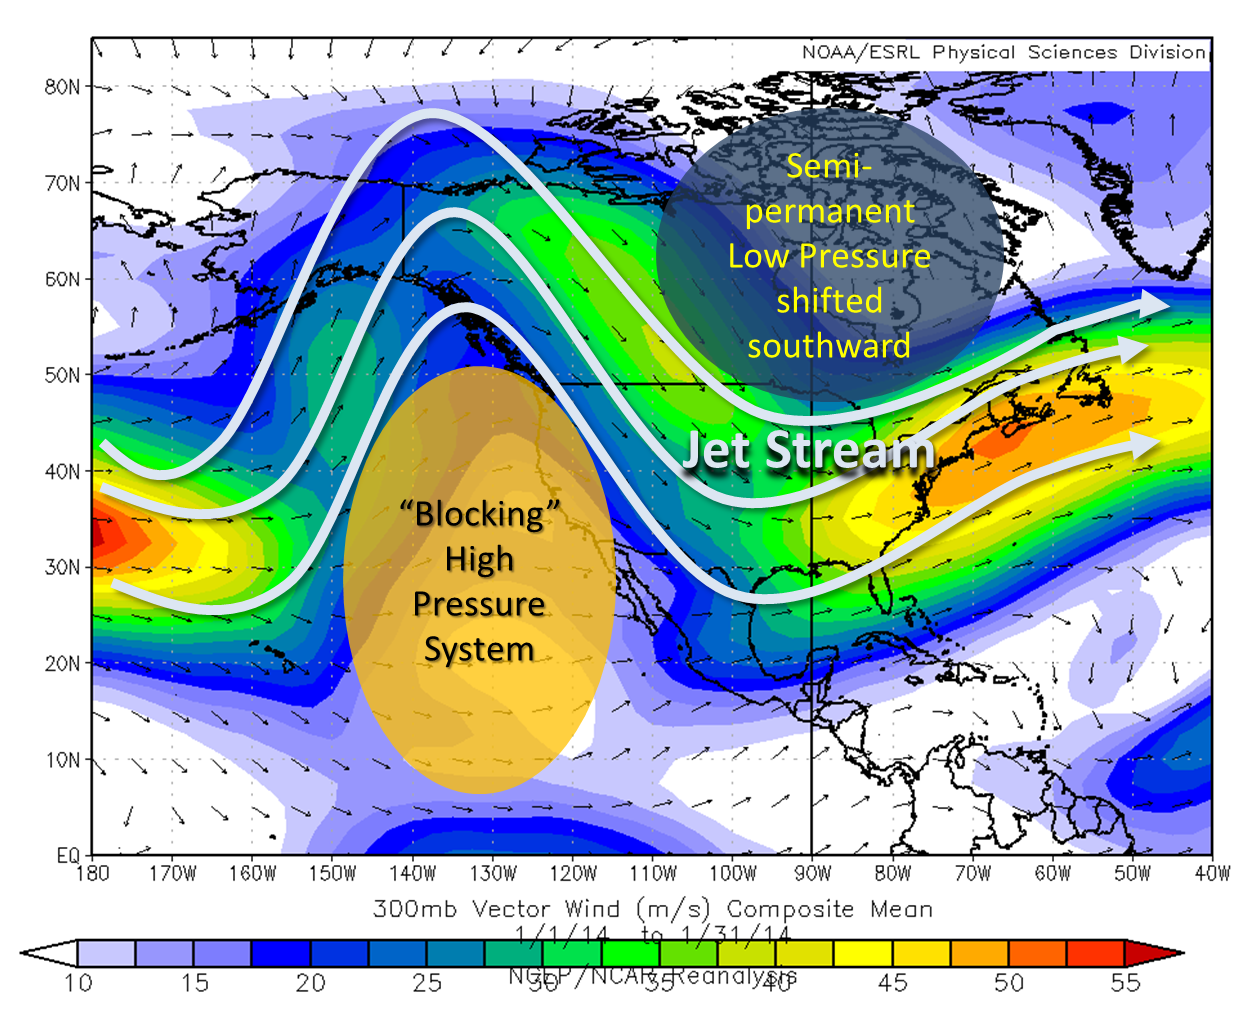 Upper-Level Wind Vectors (300 mb) for January 2014